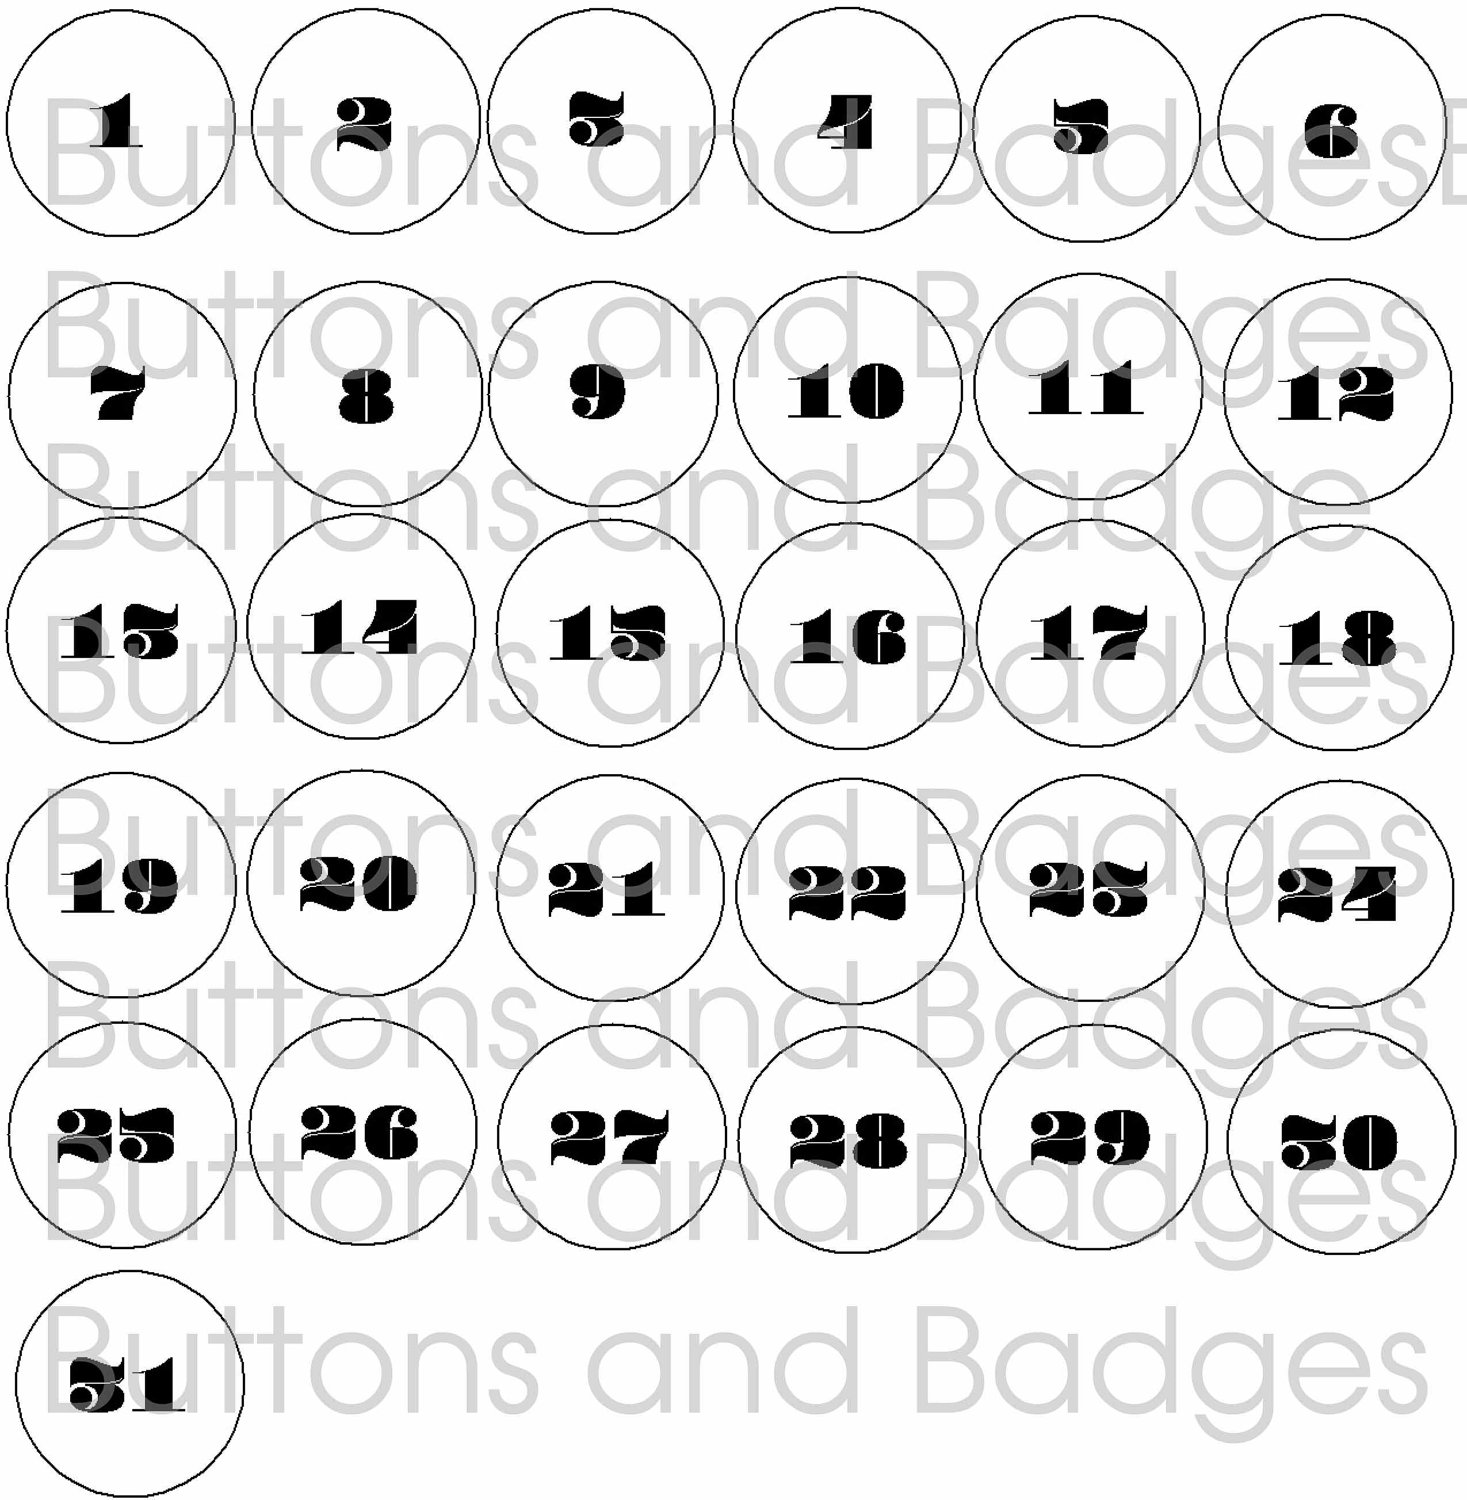 image-result-for-les-numeros-activities-french-worksheets-number-worksheets-classroom-art